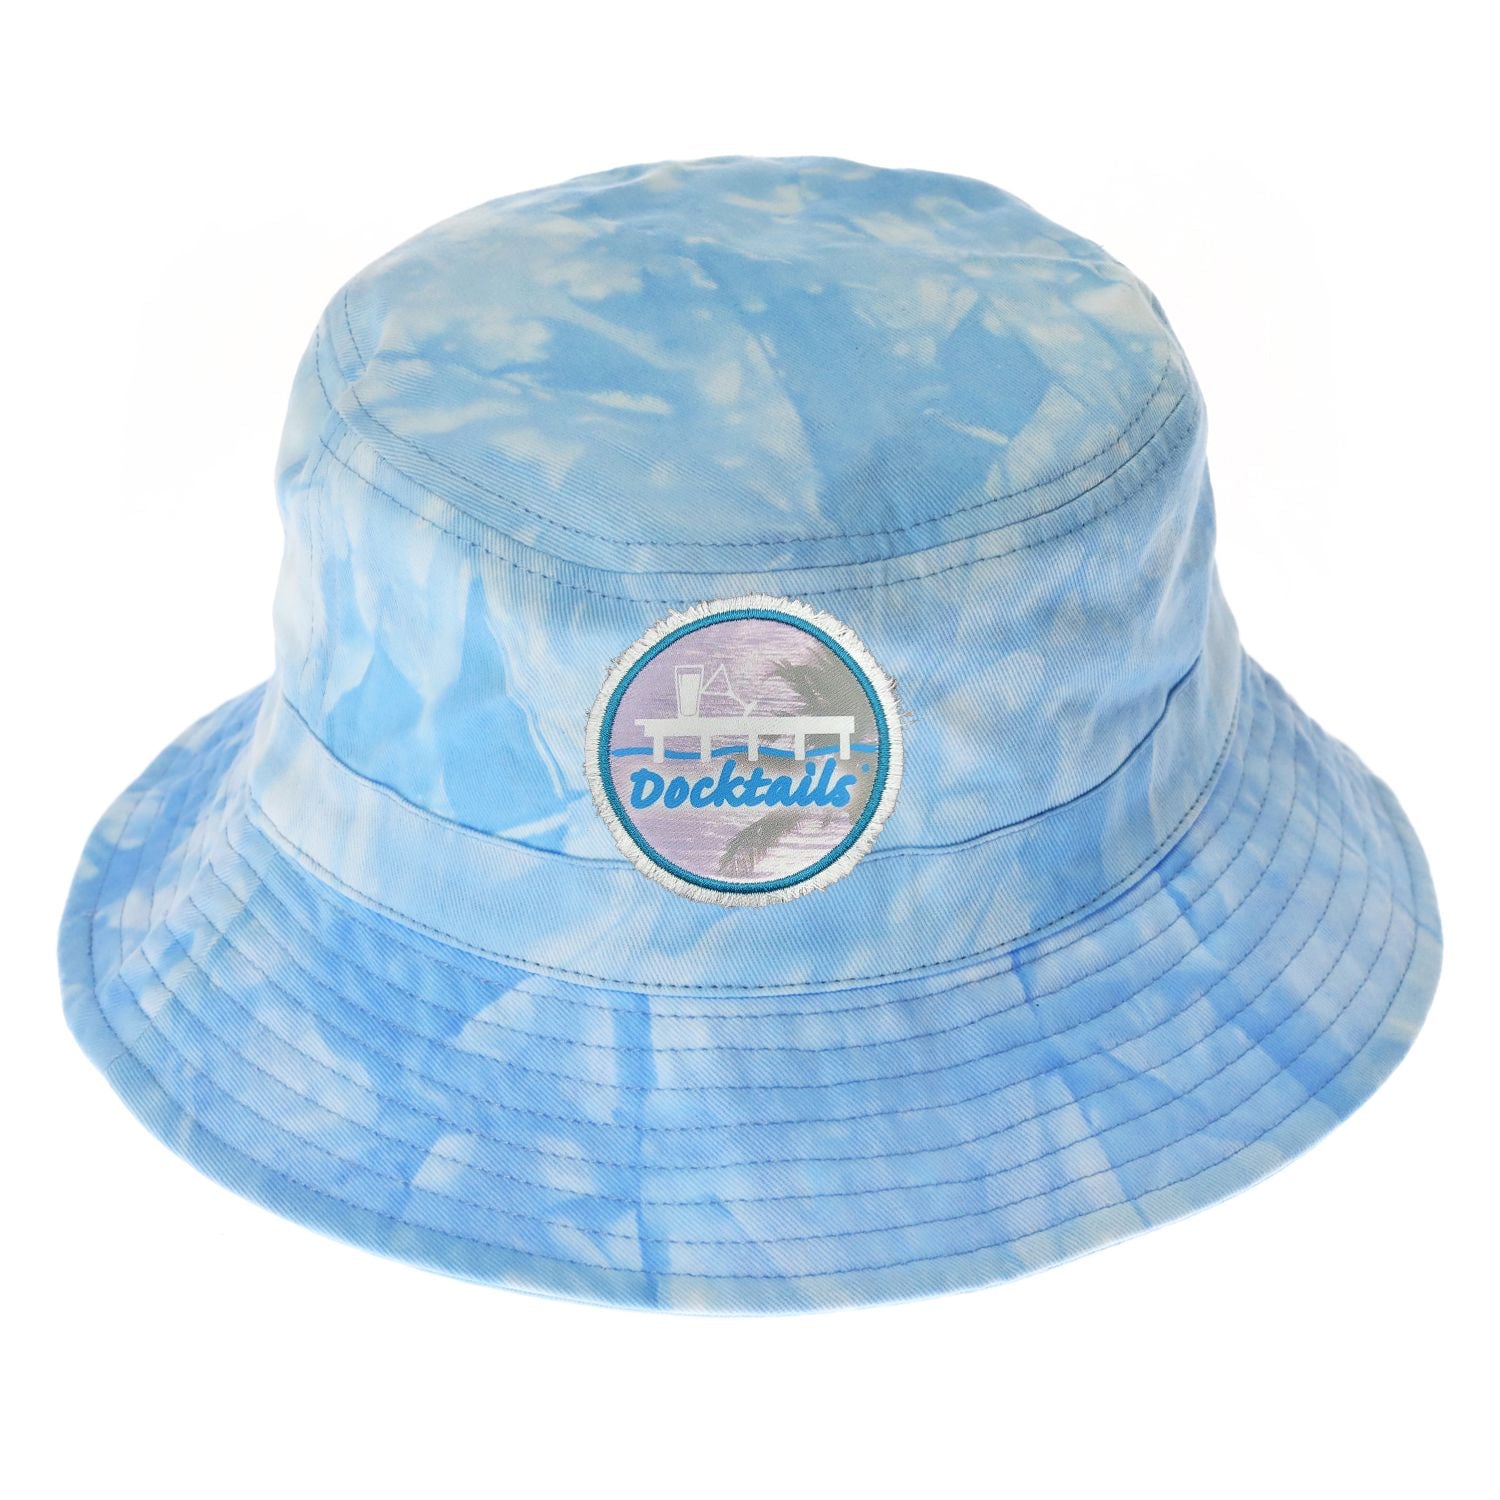 Docktails Beach Bucket Hat in blue tie dye; crushable and packable, 100% cotton